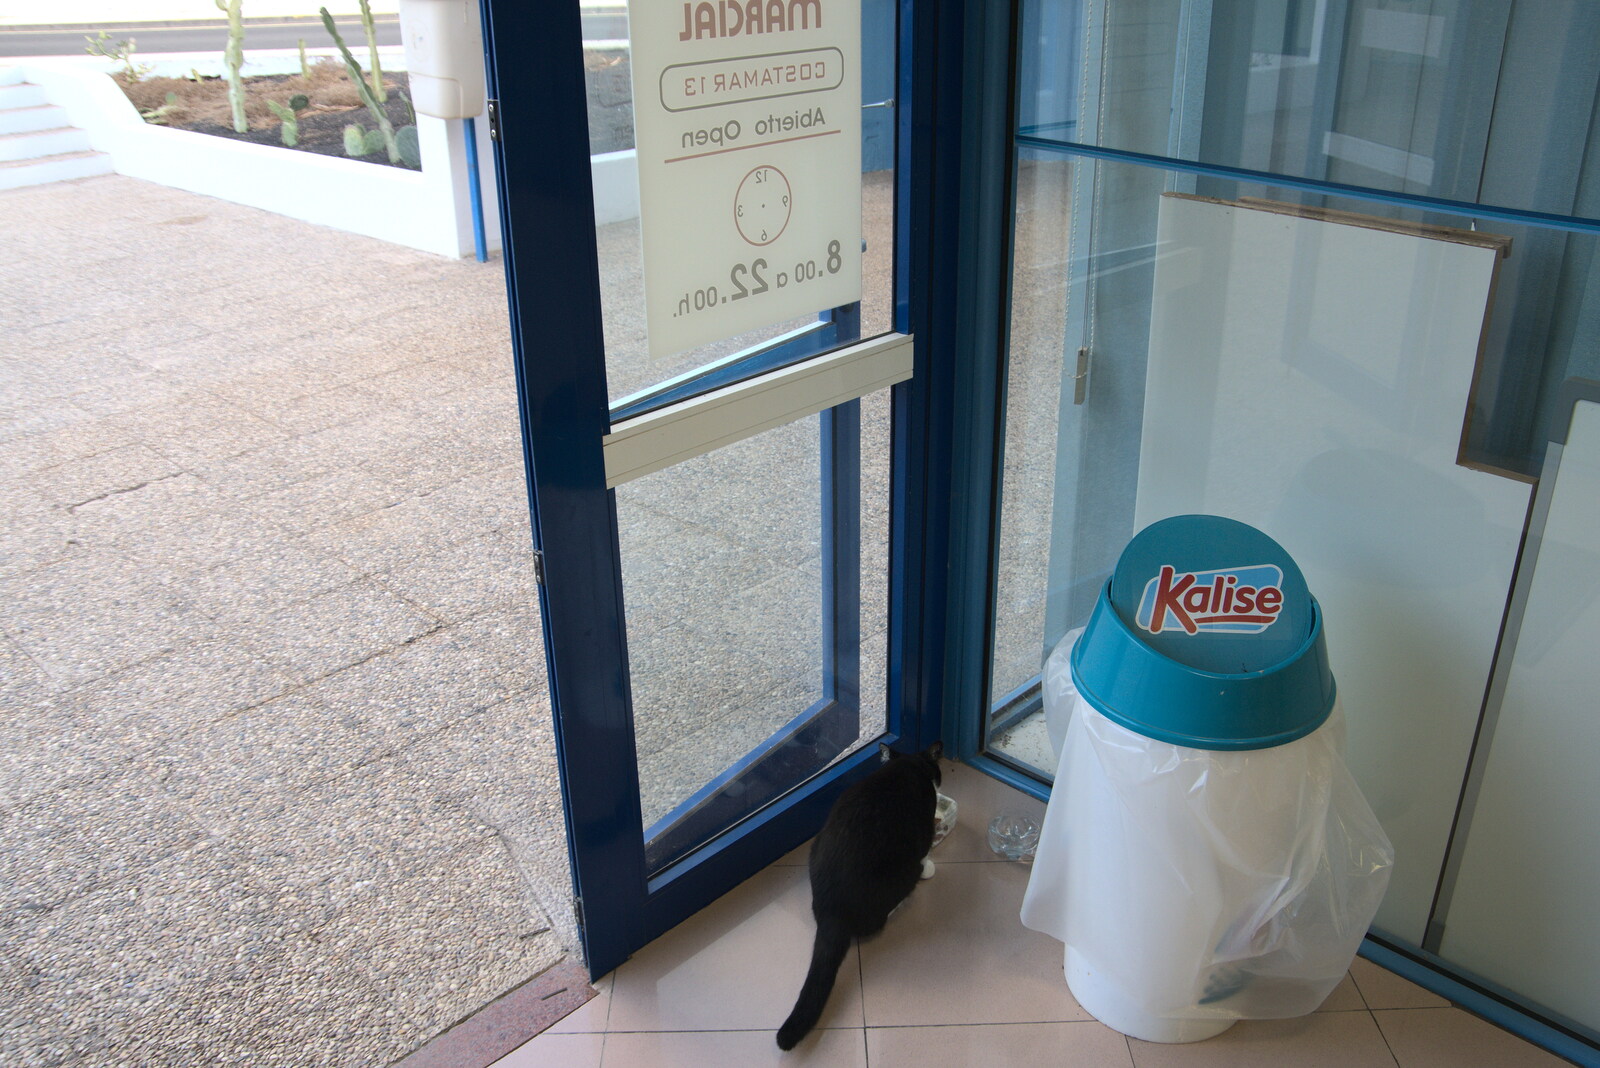 The Spar cat gets breakfast from The Volcanoes of Lanzarote, Canary Islands, Spain - 27th October 2021